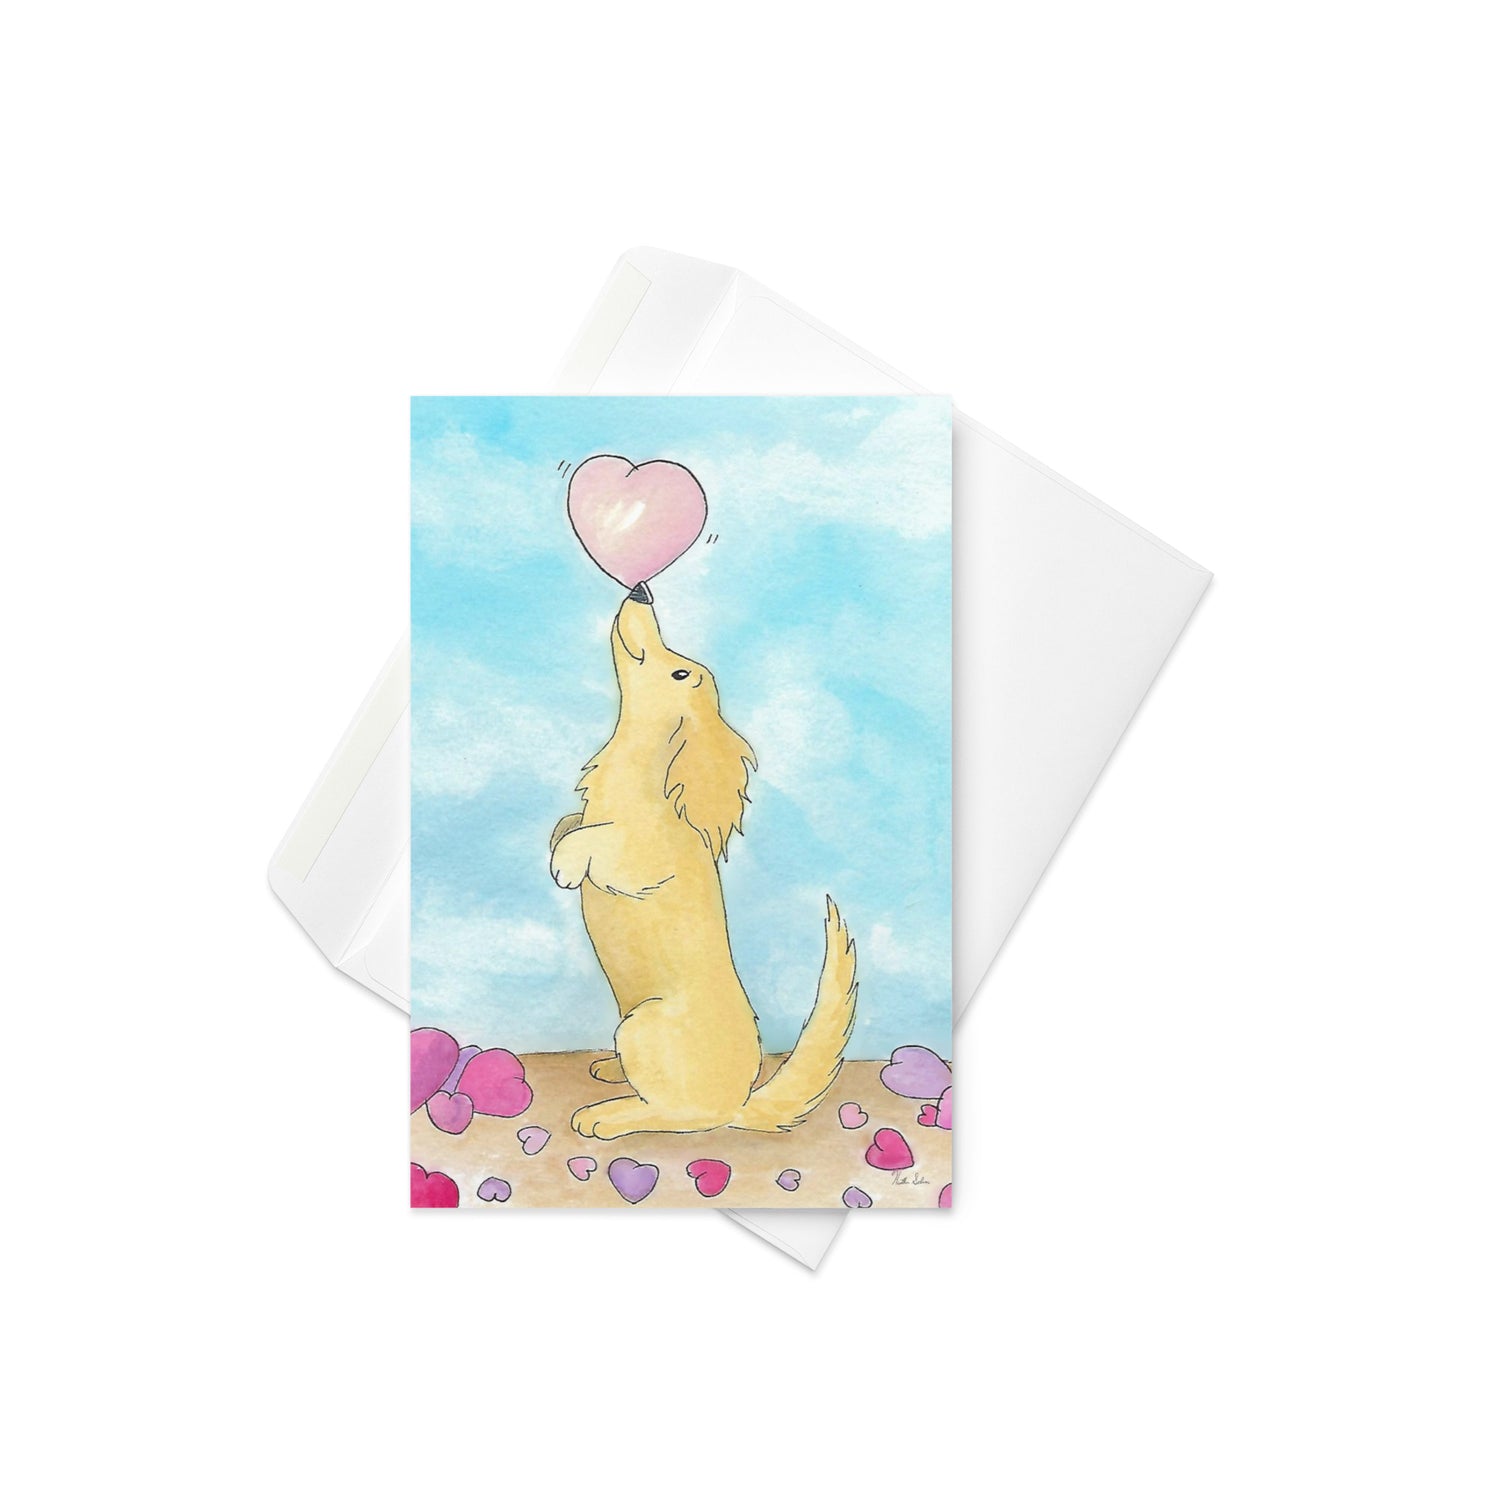 4 x 6 inch greeting card with white envelope. Blank inside. Features Puppy Love watercolor print on front. Cute dog balancing a heart on its nose.